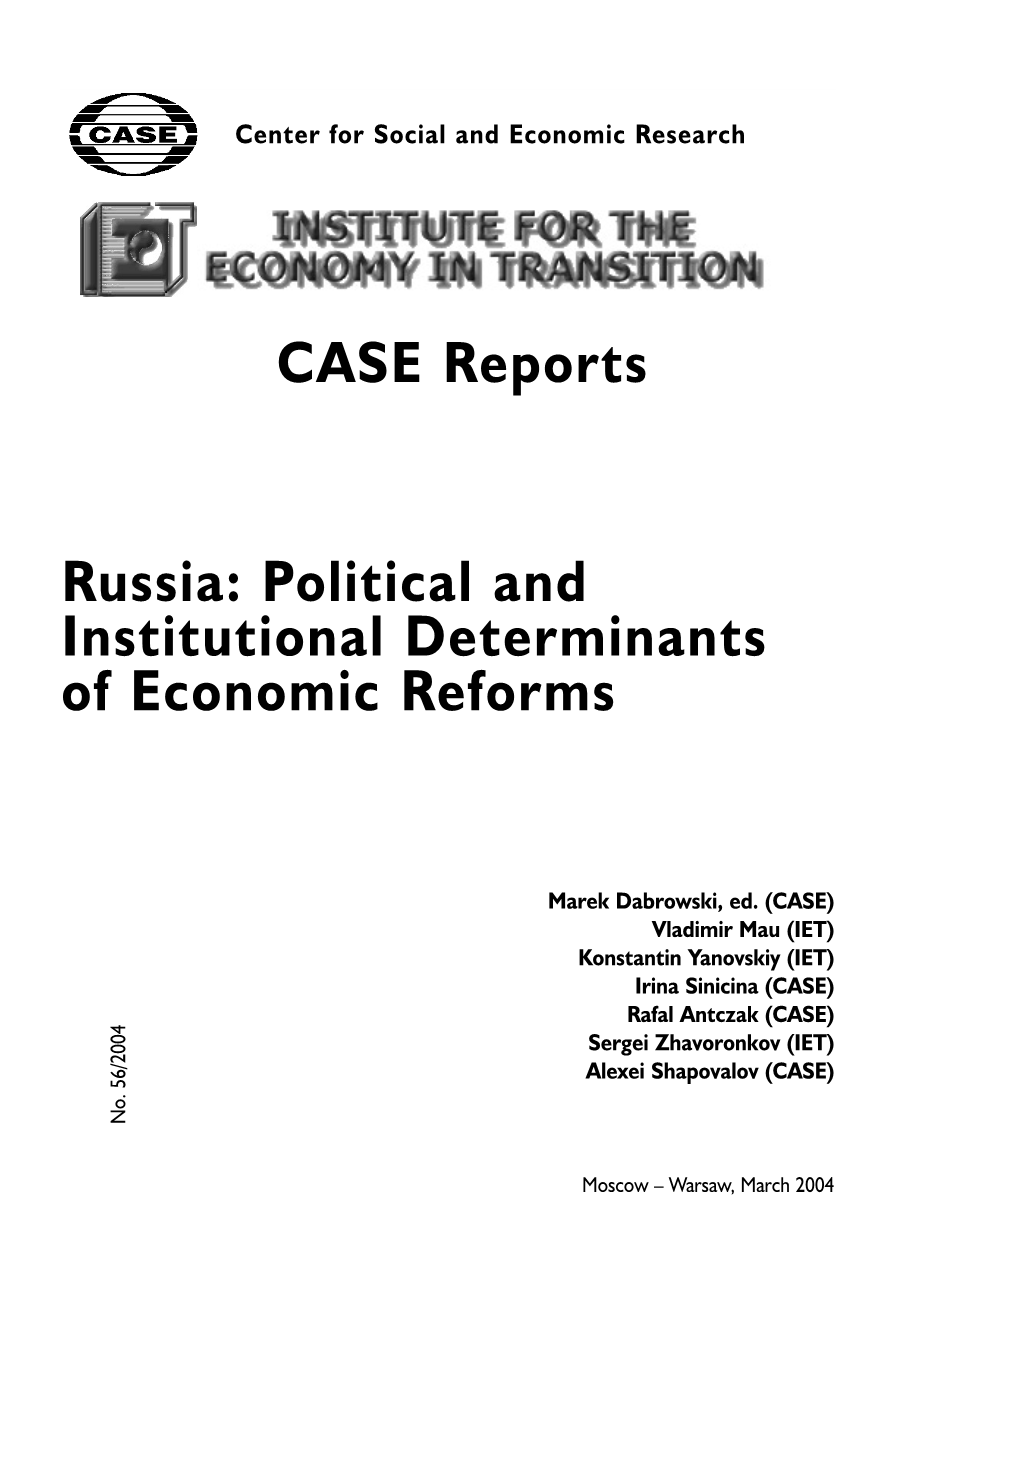 Russia: Political and Institutional Determinants of Economic Reforms